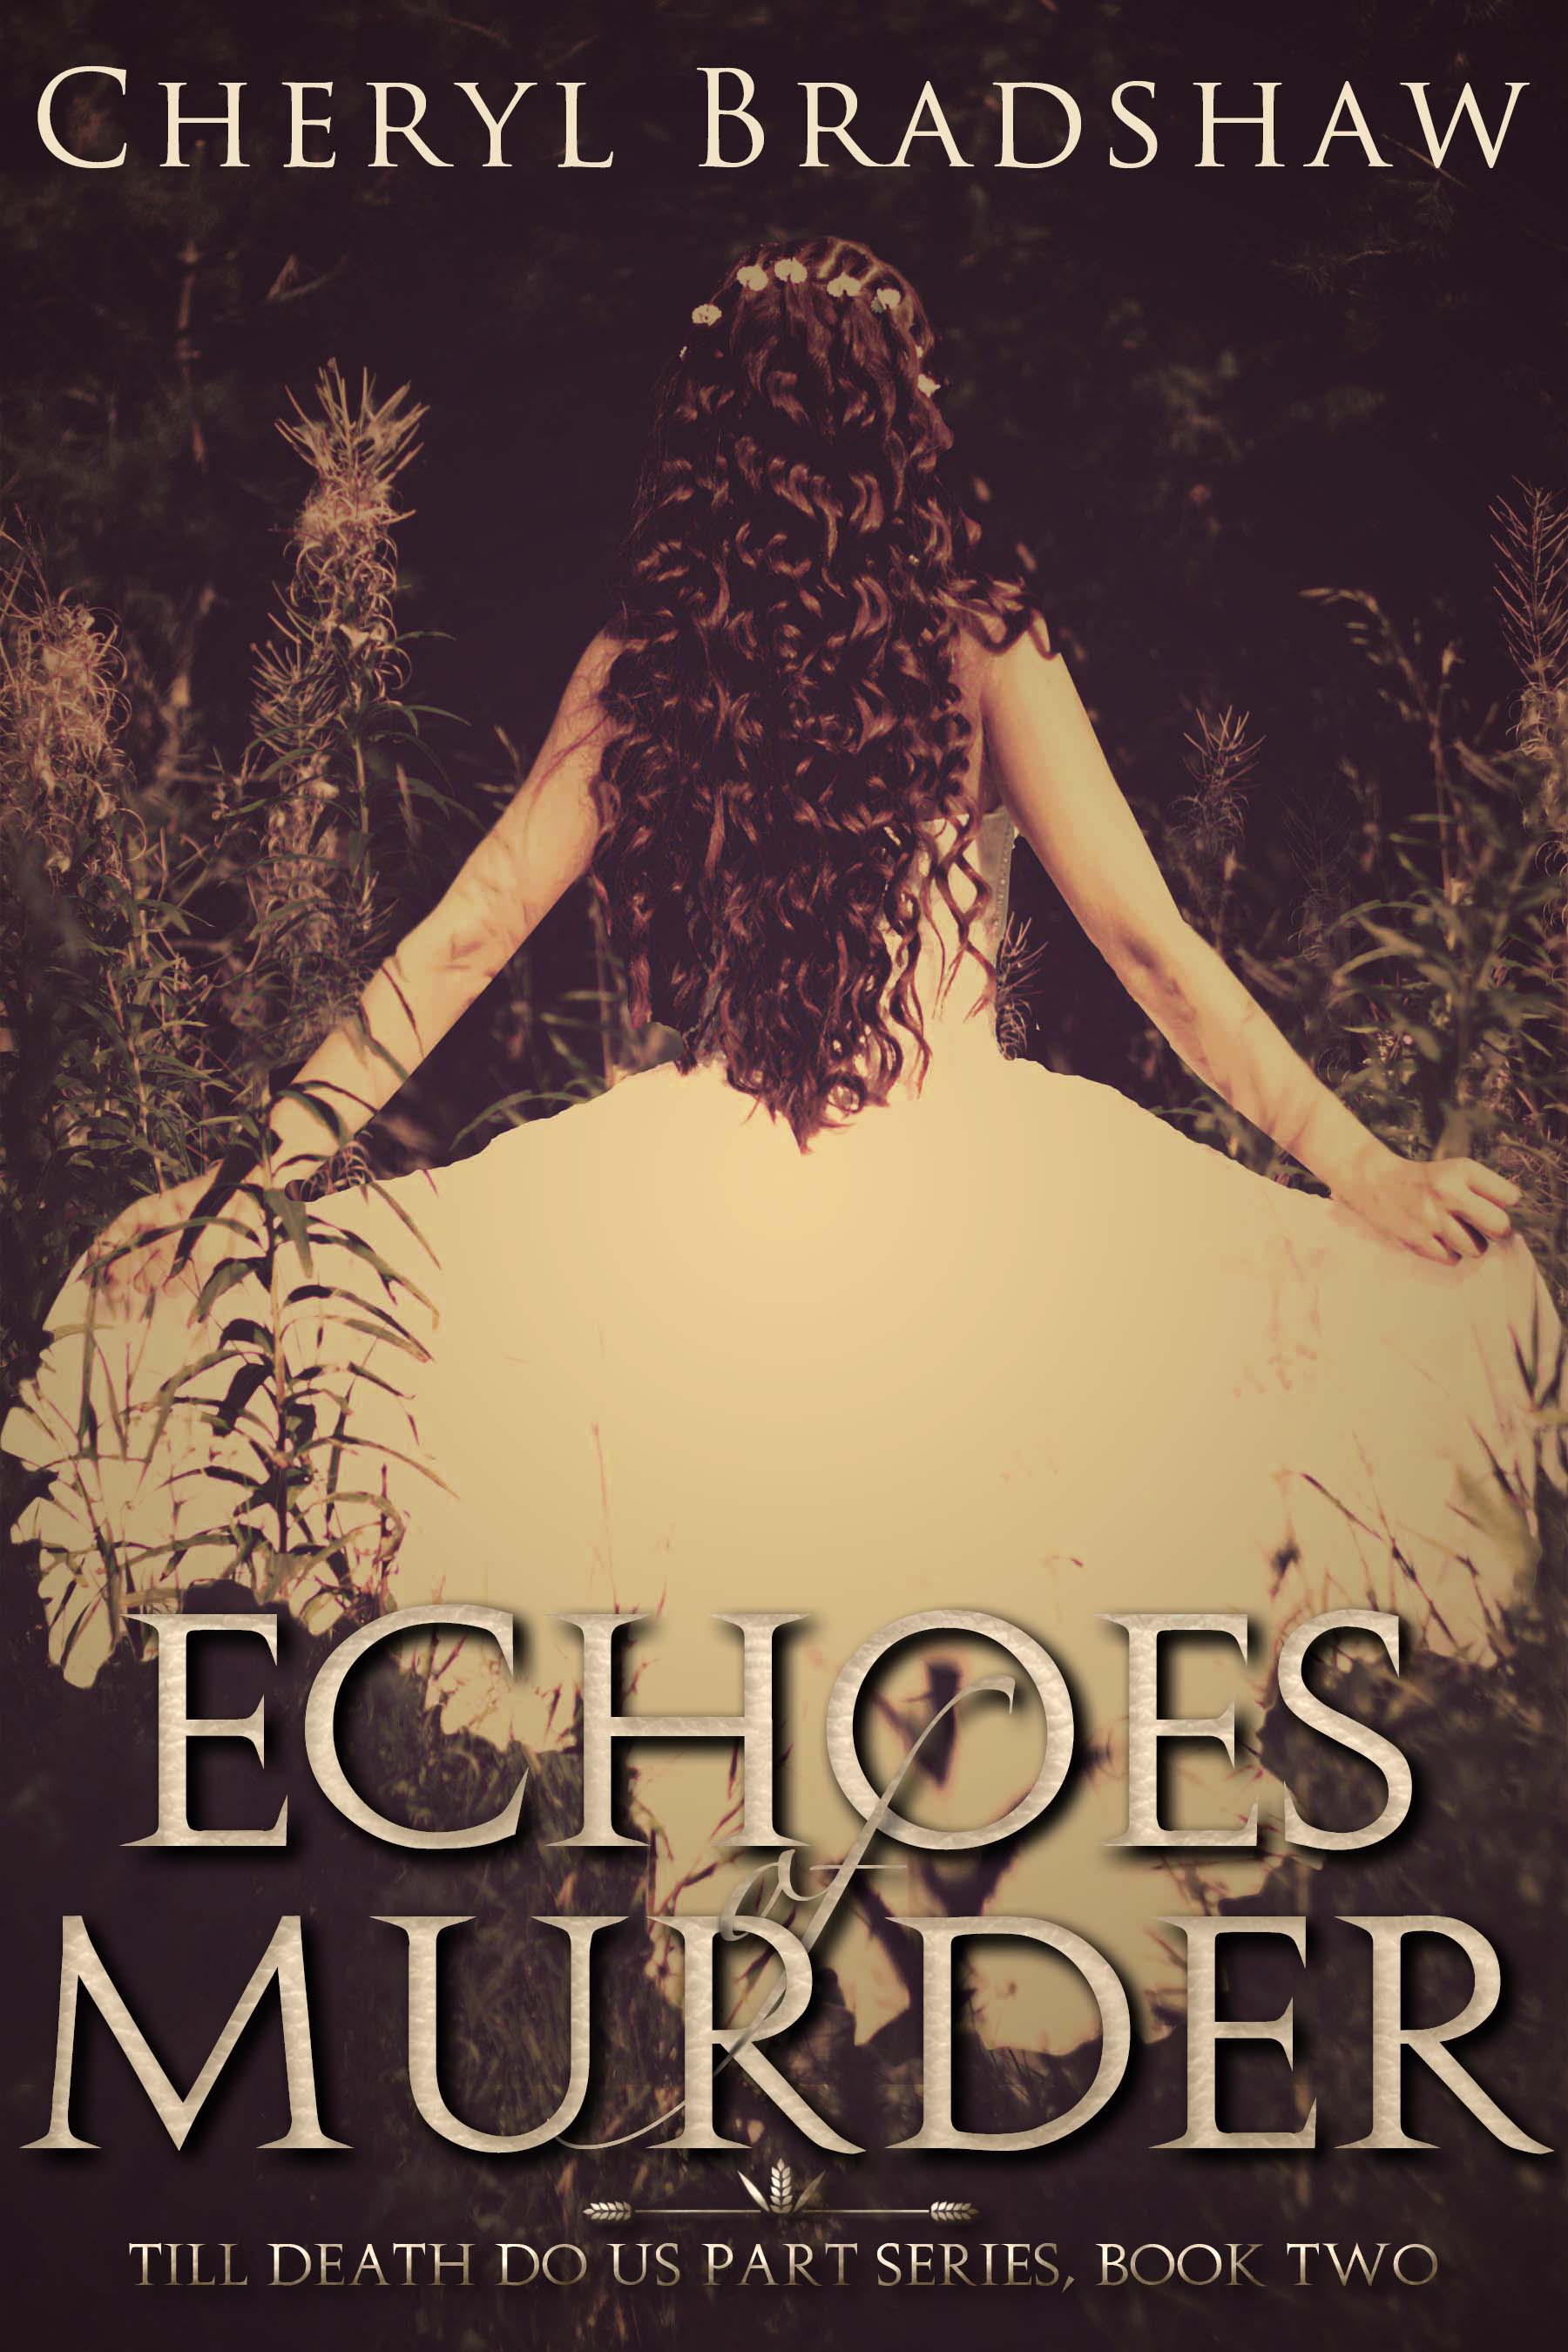 Echoes of Murder by Cheryl Bradshaw, book two in Til Death series